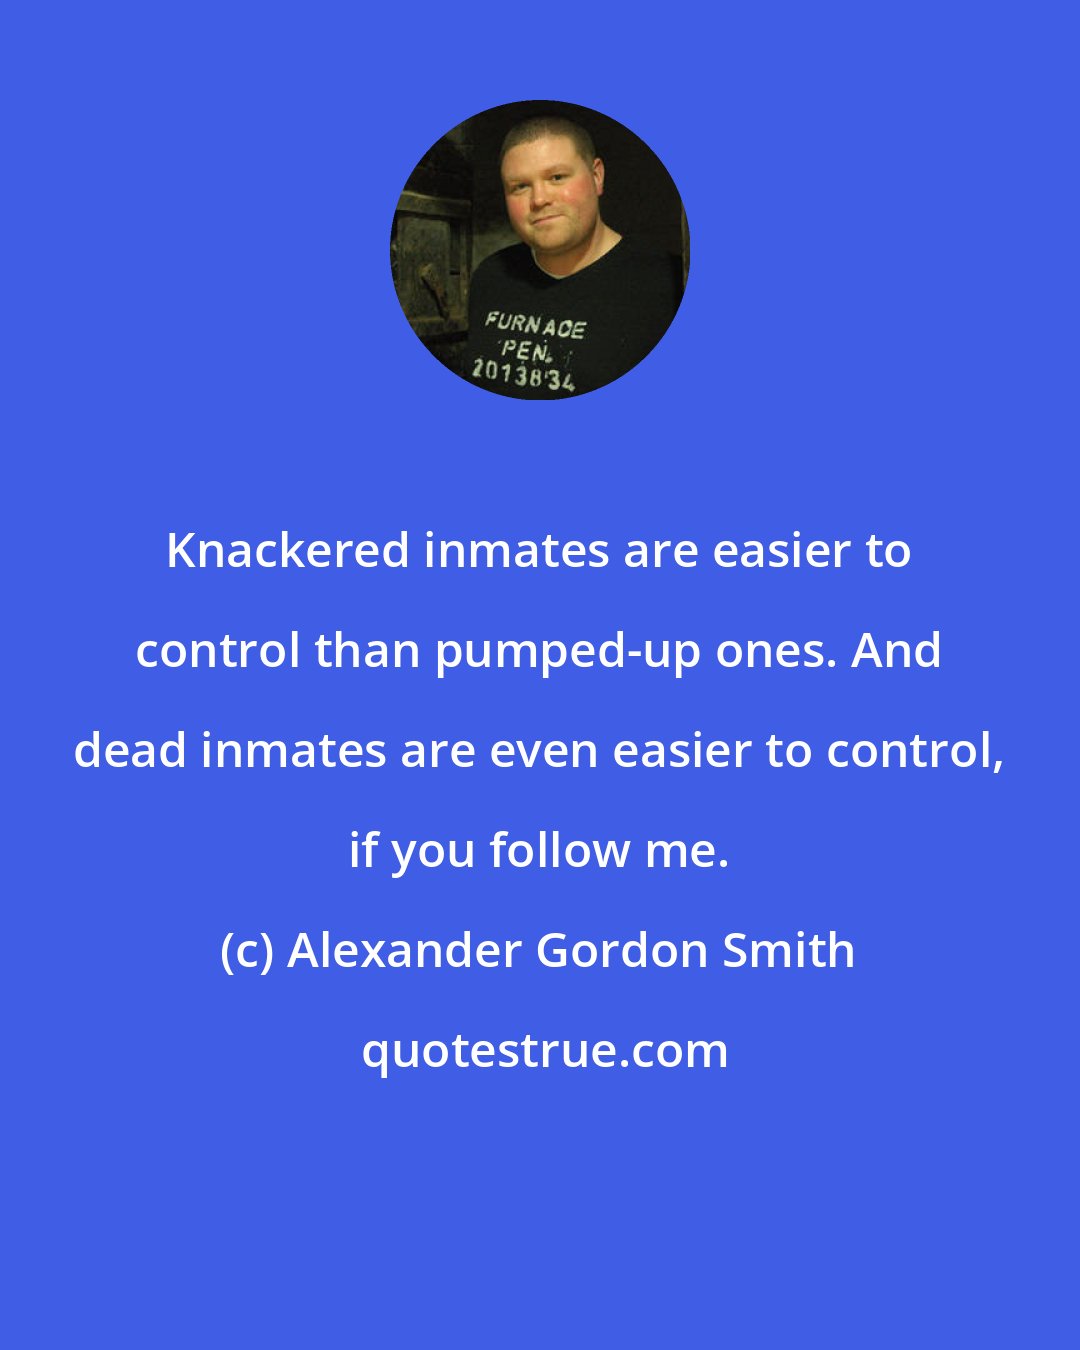 Alexander Gordon Smith: Knackered inmates are easier to control than pumped-up ones. And dead inmates are even easier to control, if you follow me.